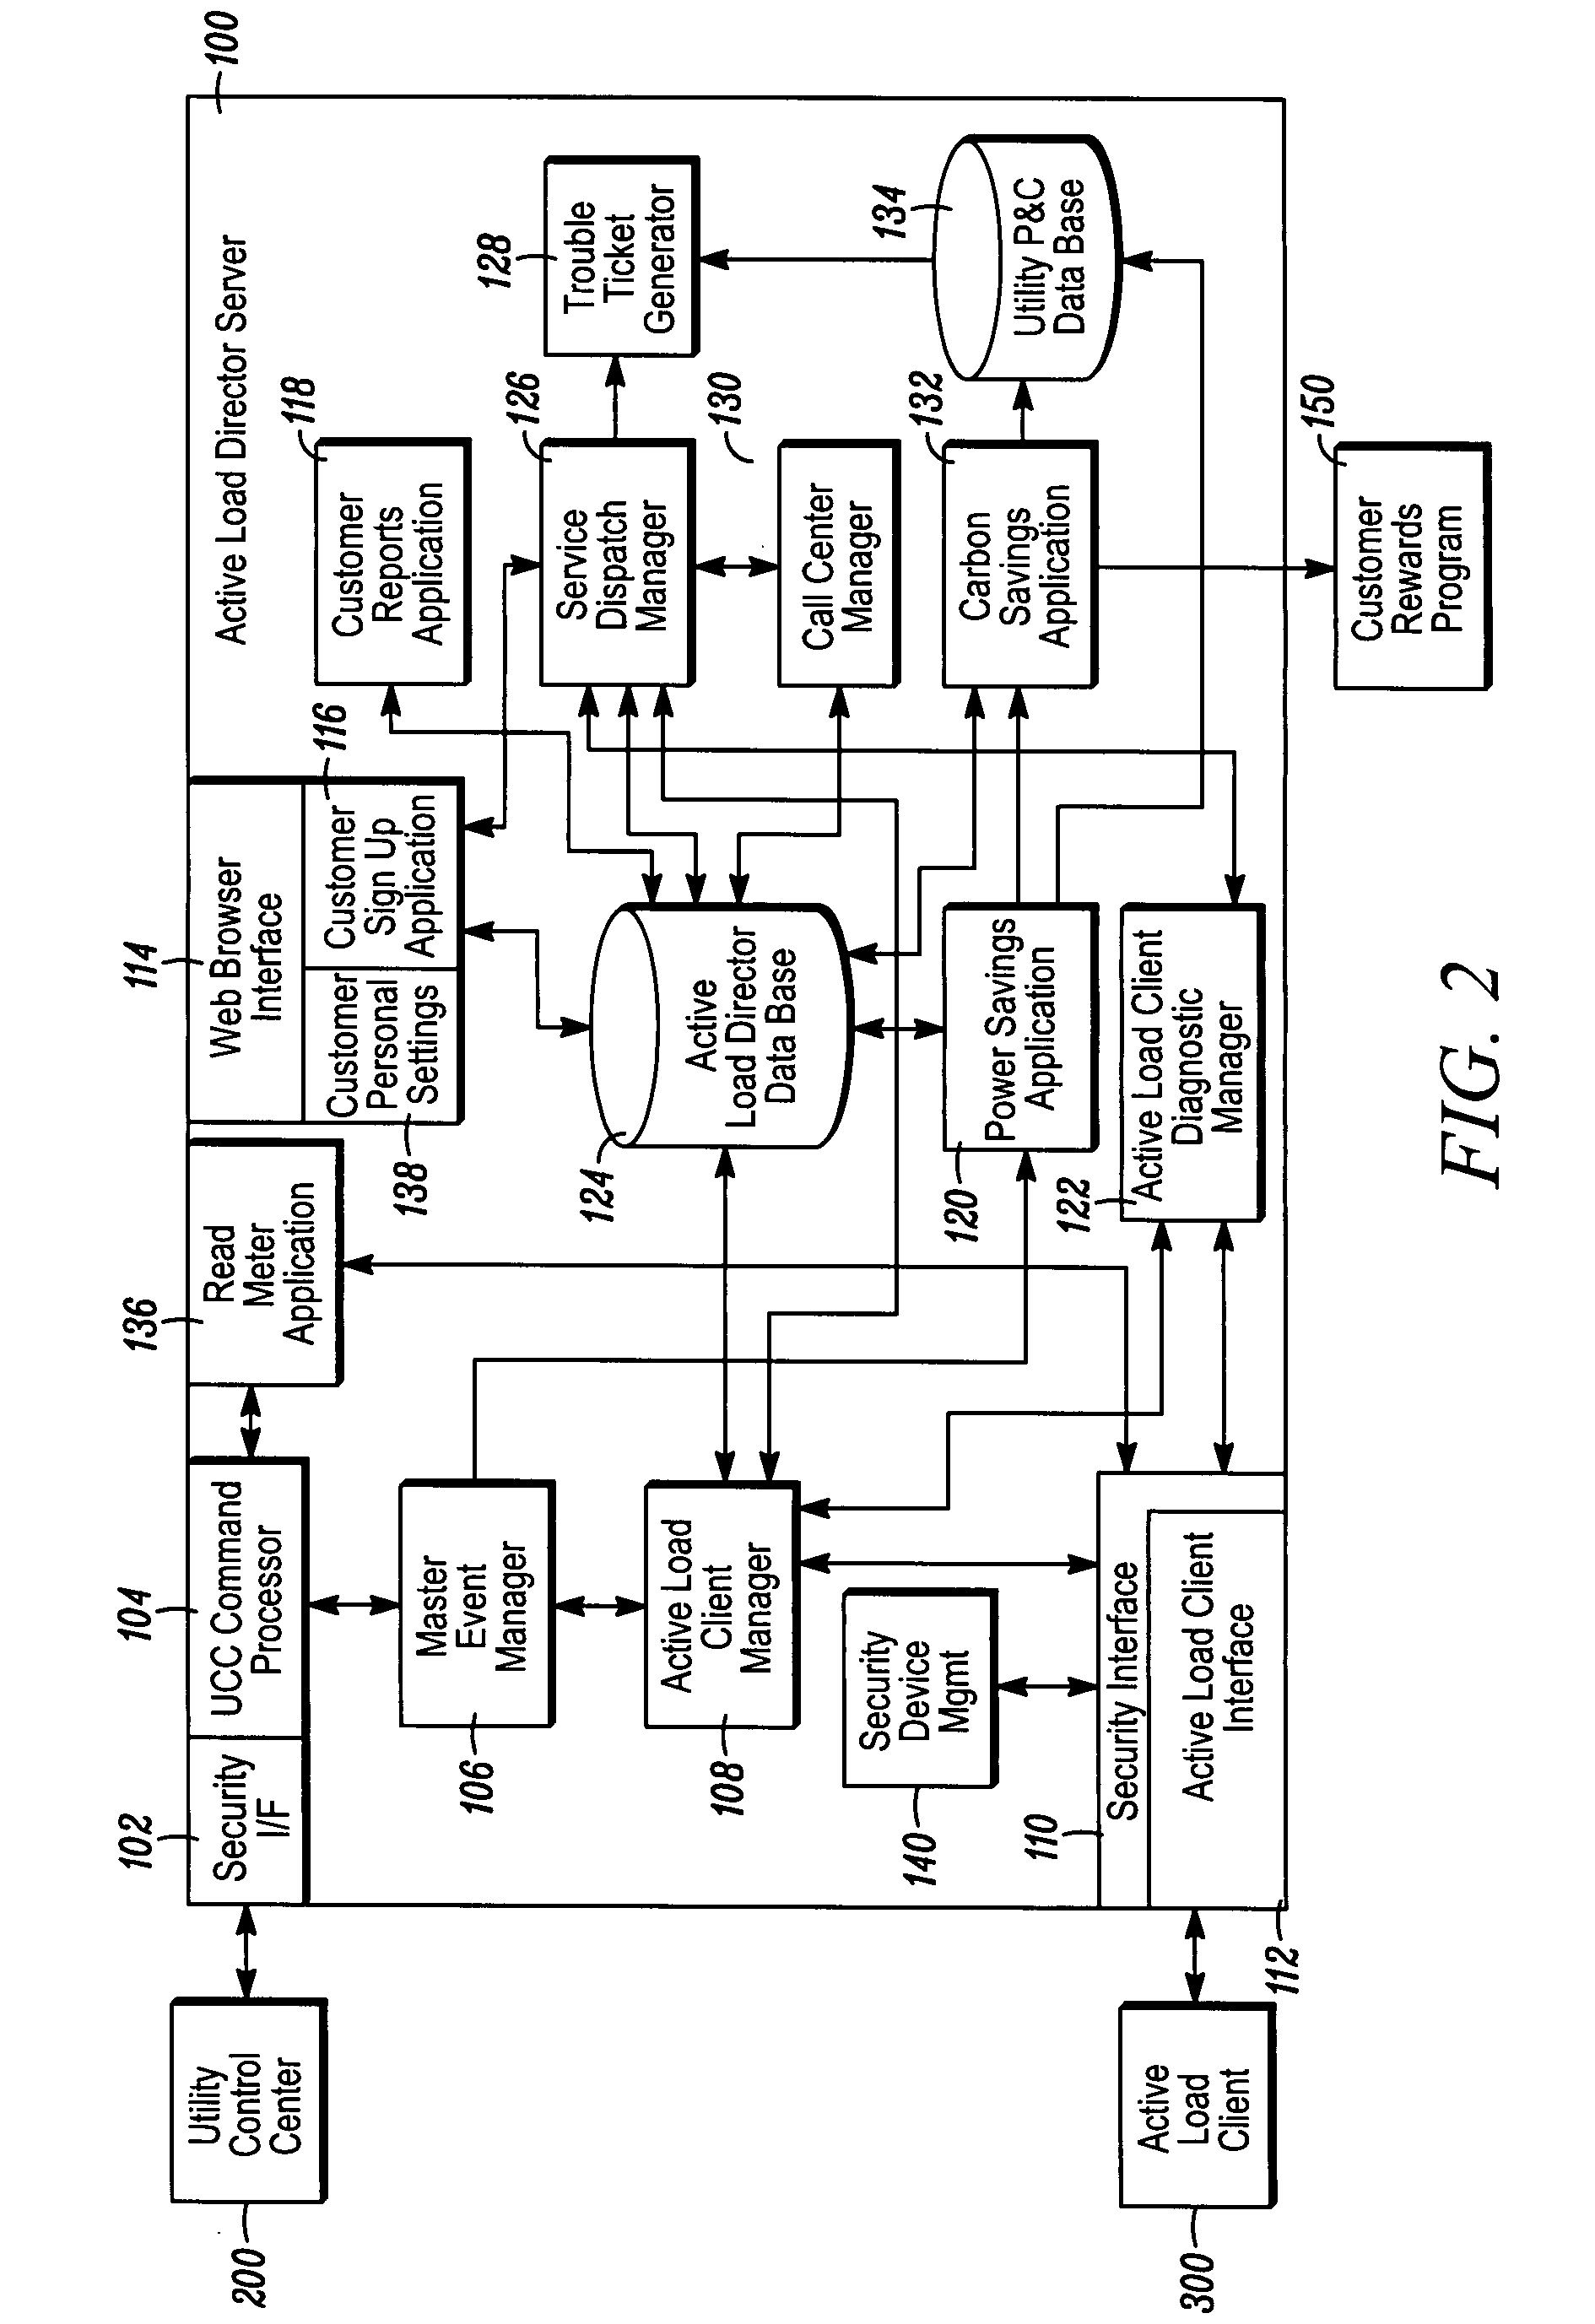 System and method for active power load management